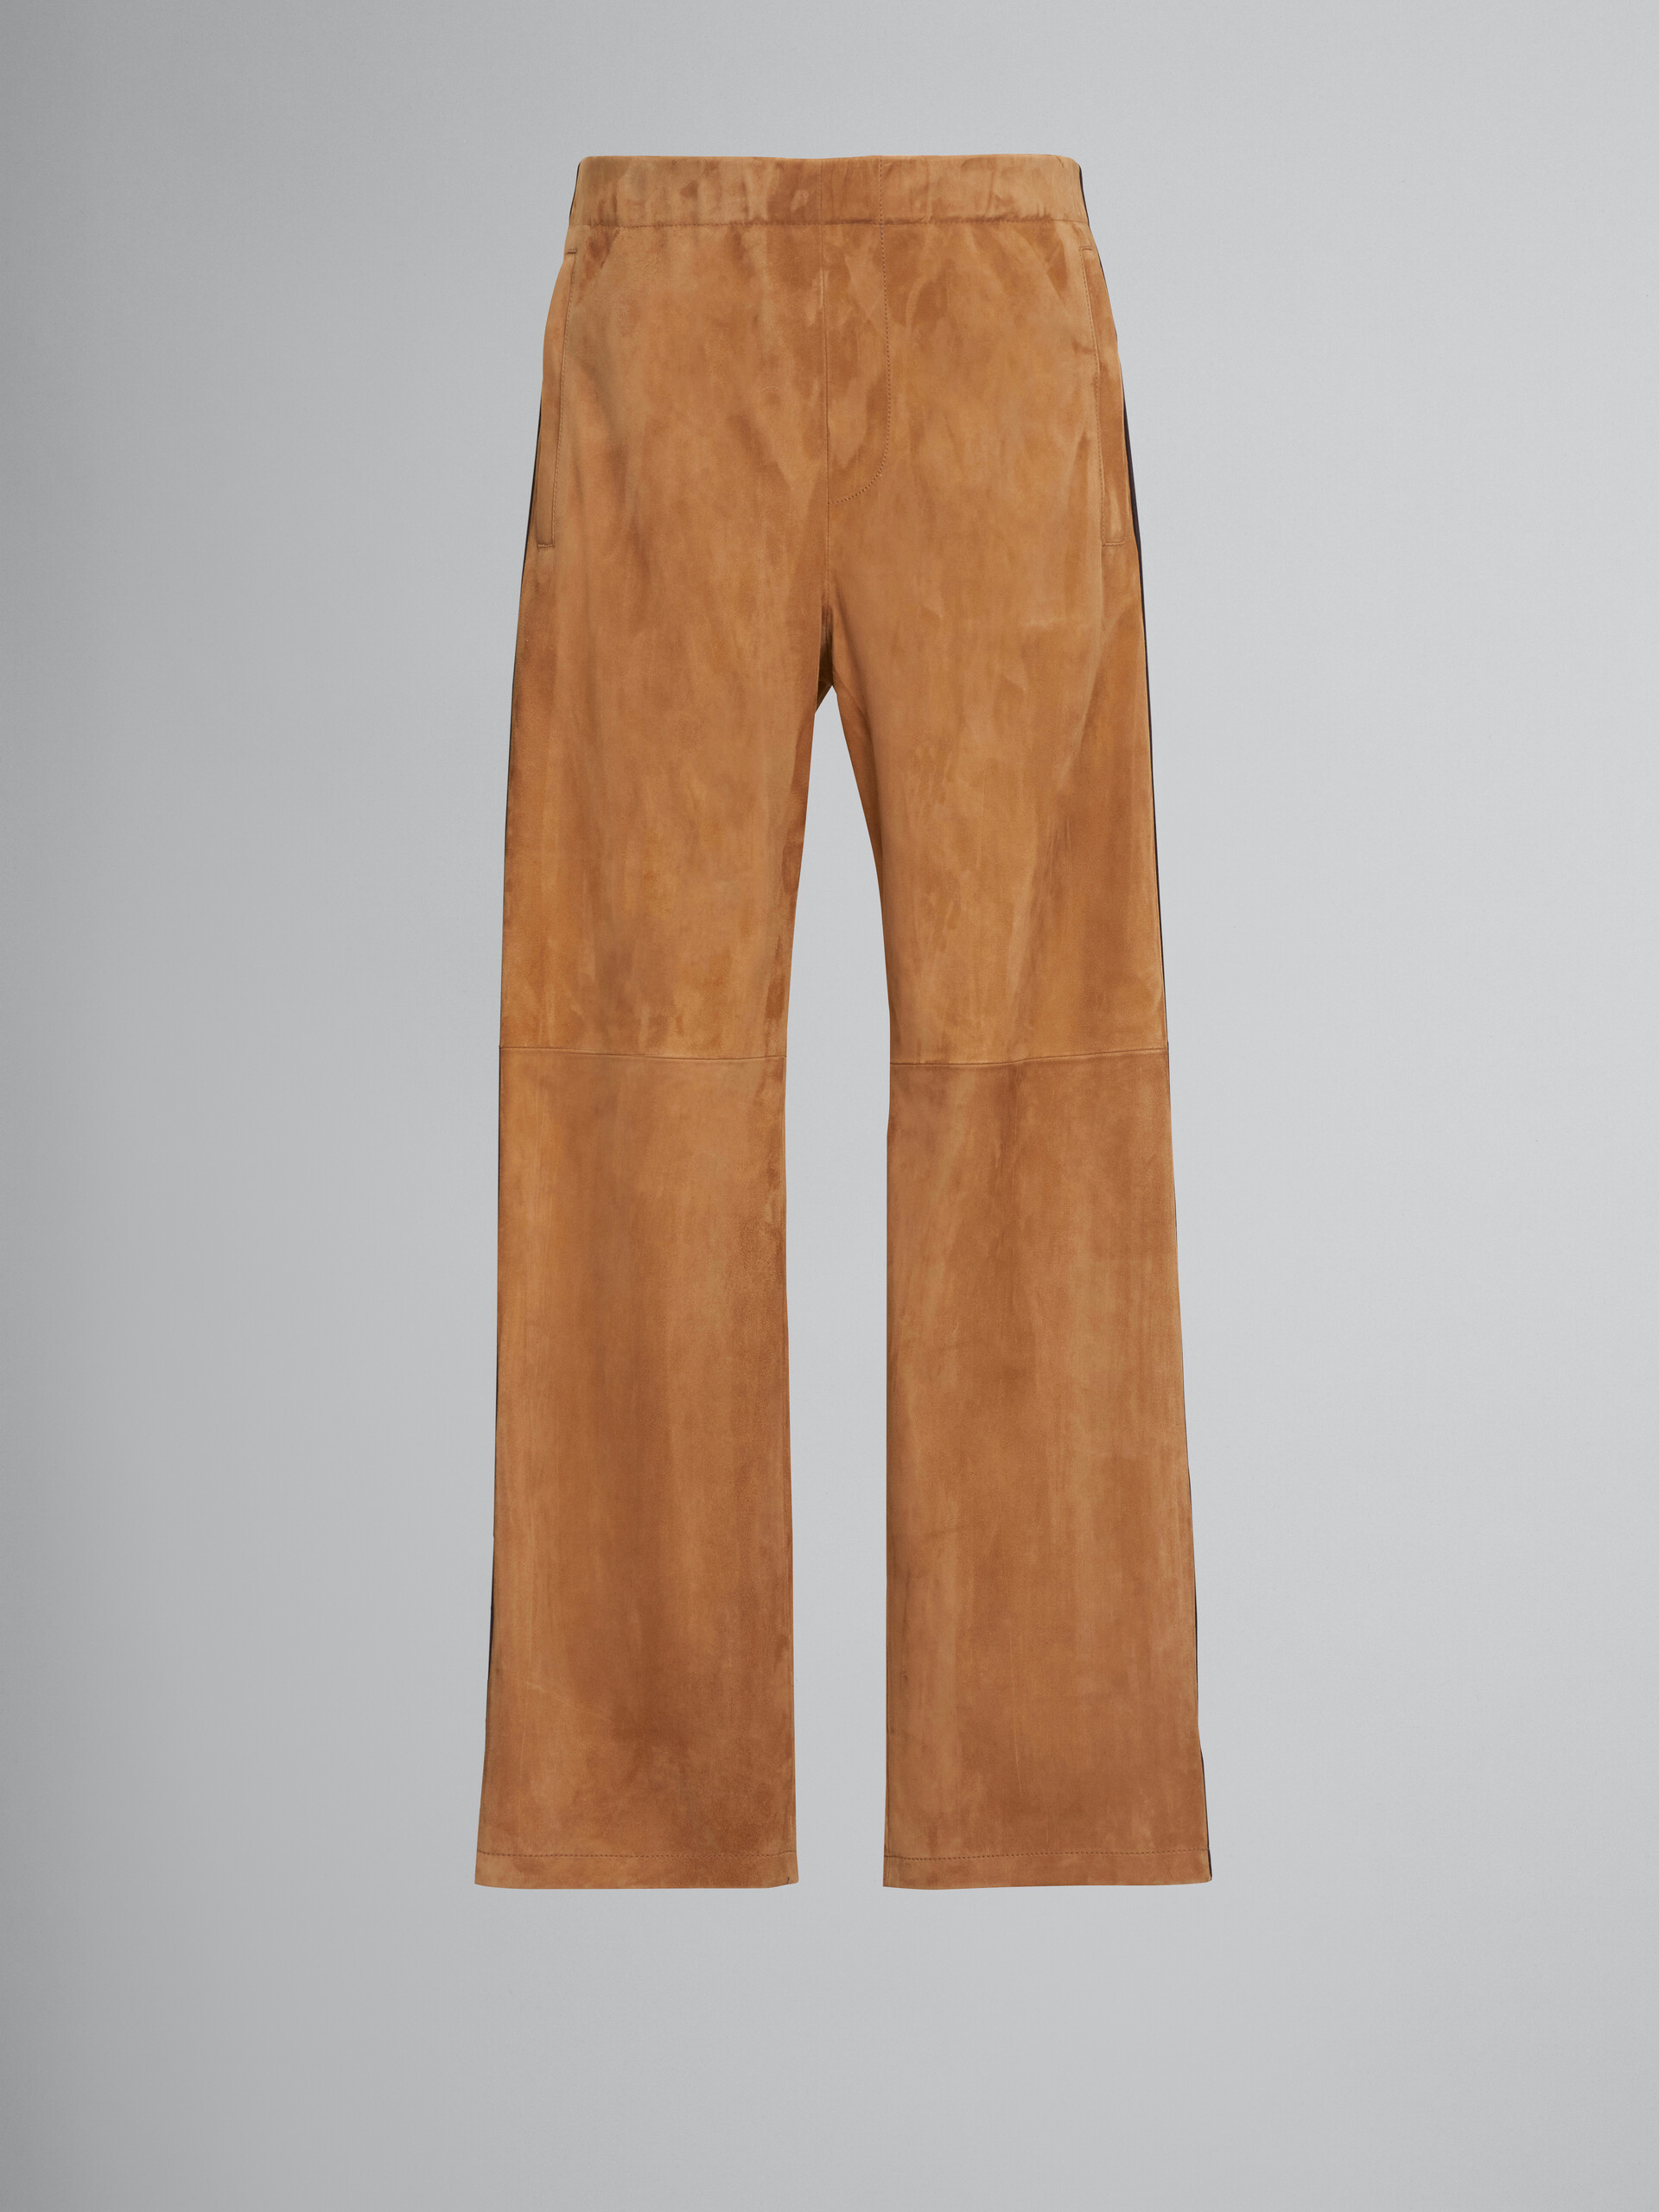 Brown suede trousers with nappa bands - Pants - Image 1